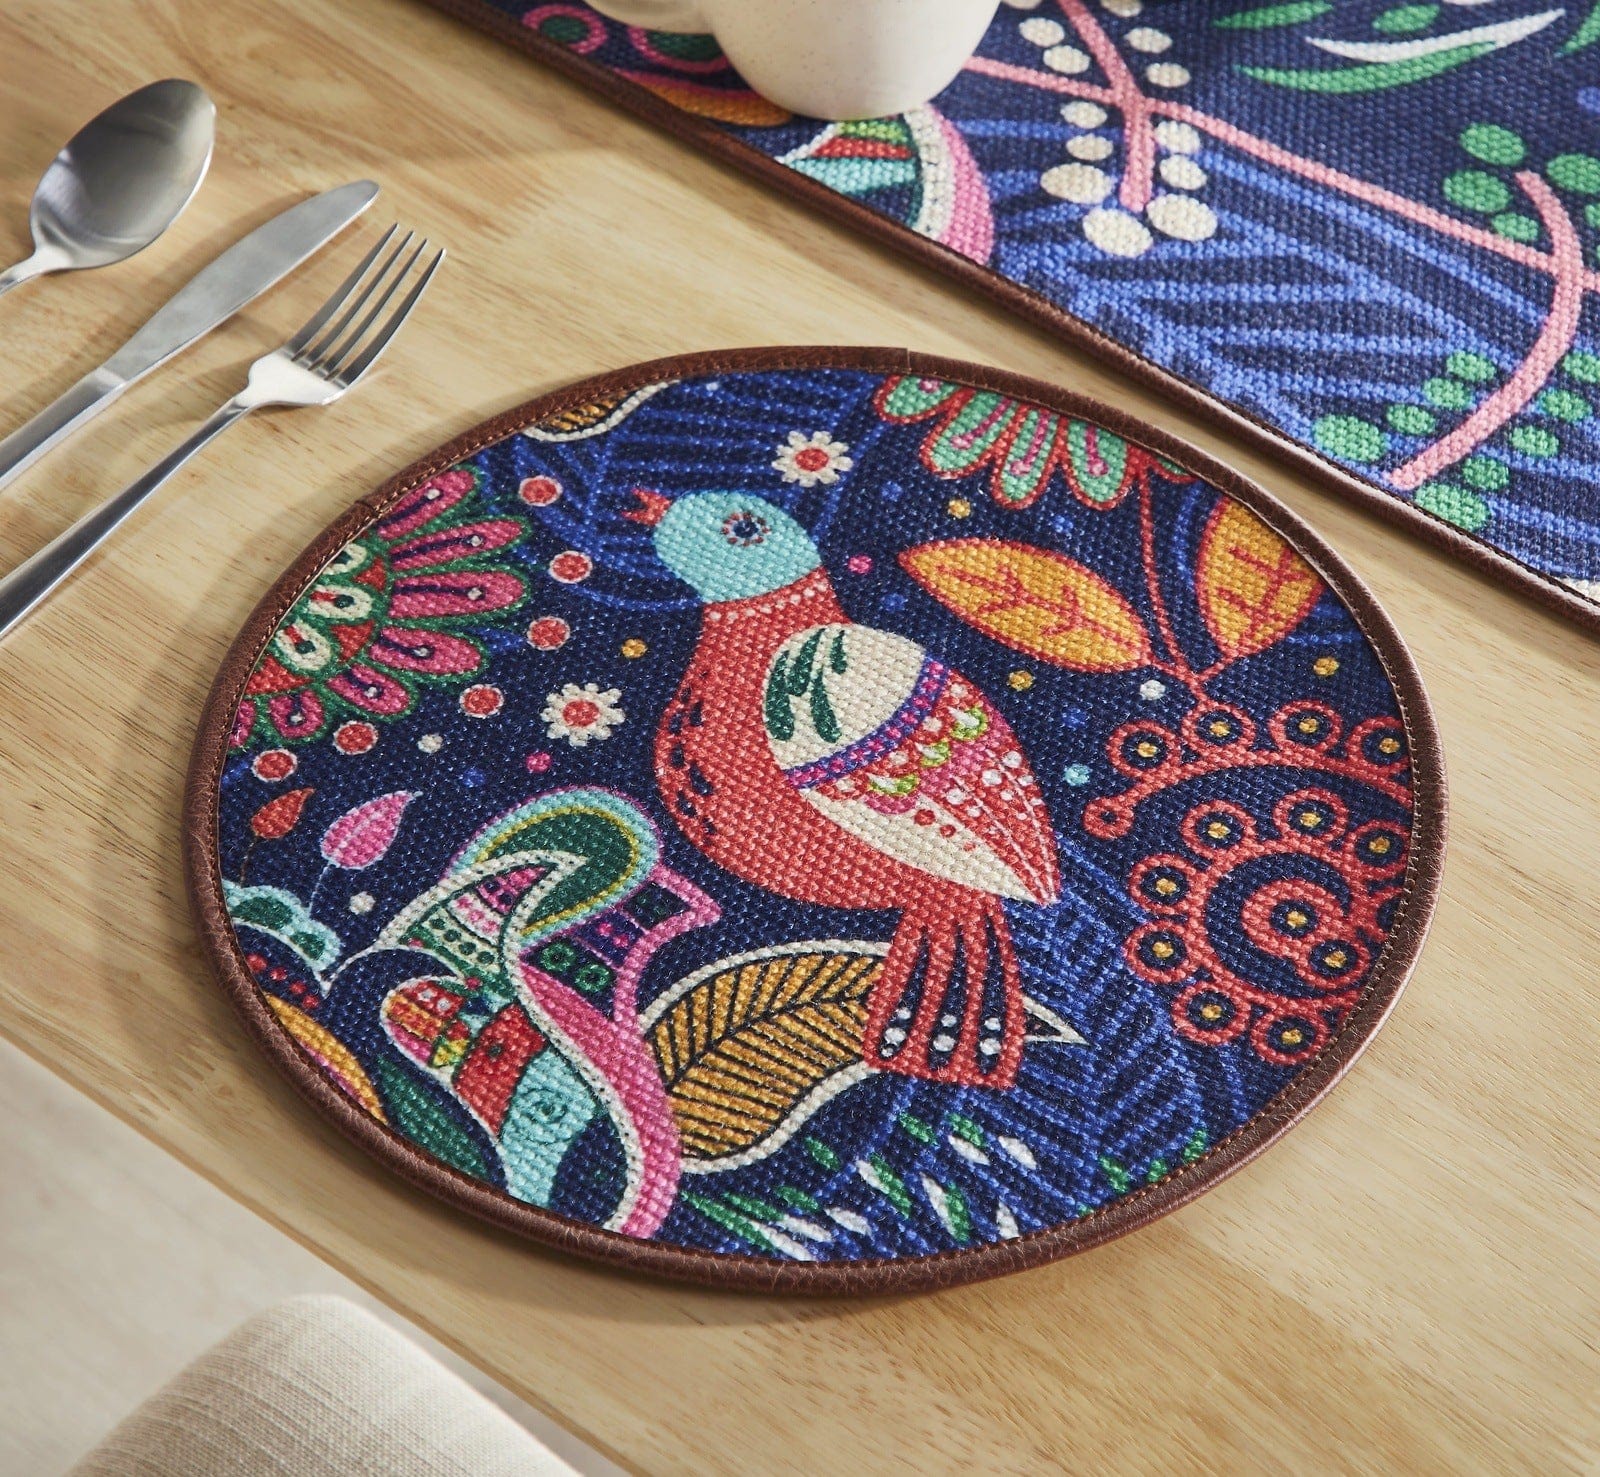 Mona-B Placemat Mona B Set of 2 Printed Placemats, 13 INCH Round, Best for Bed-Side Table/Center Table, Dining Table/Shelves - PP-111